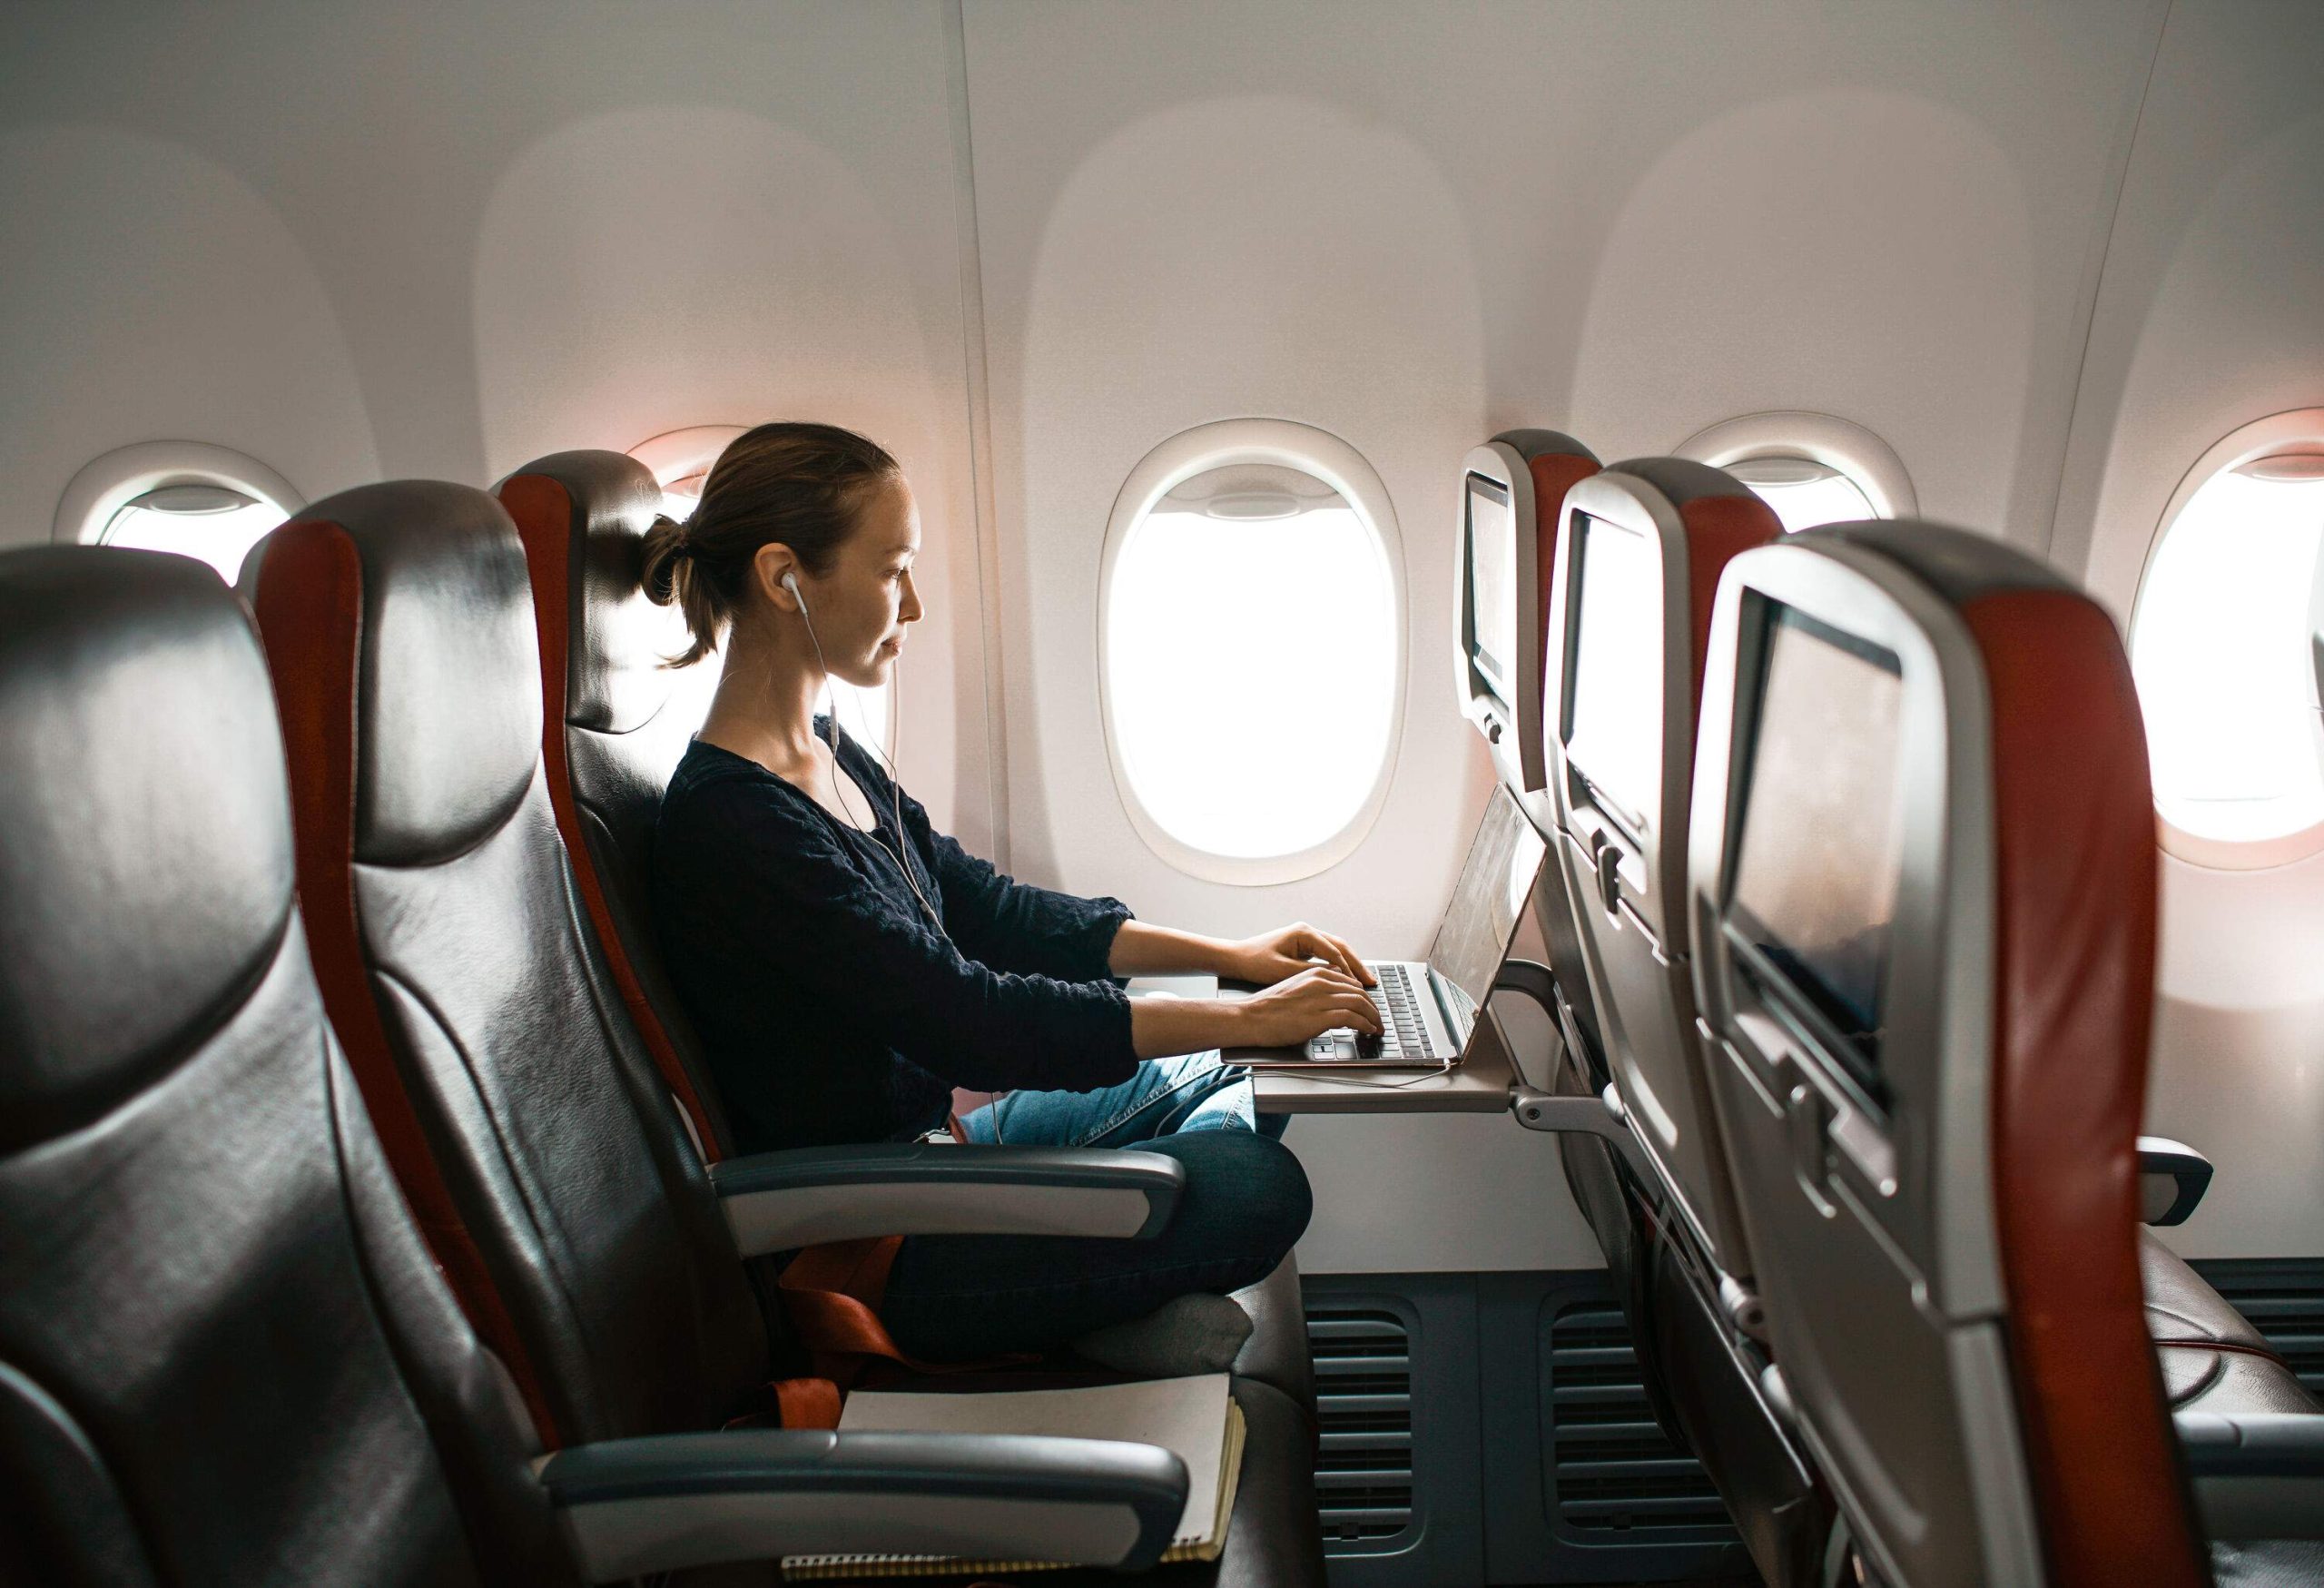 A woman seated inside an aircraft by the window engaged in her laptop.